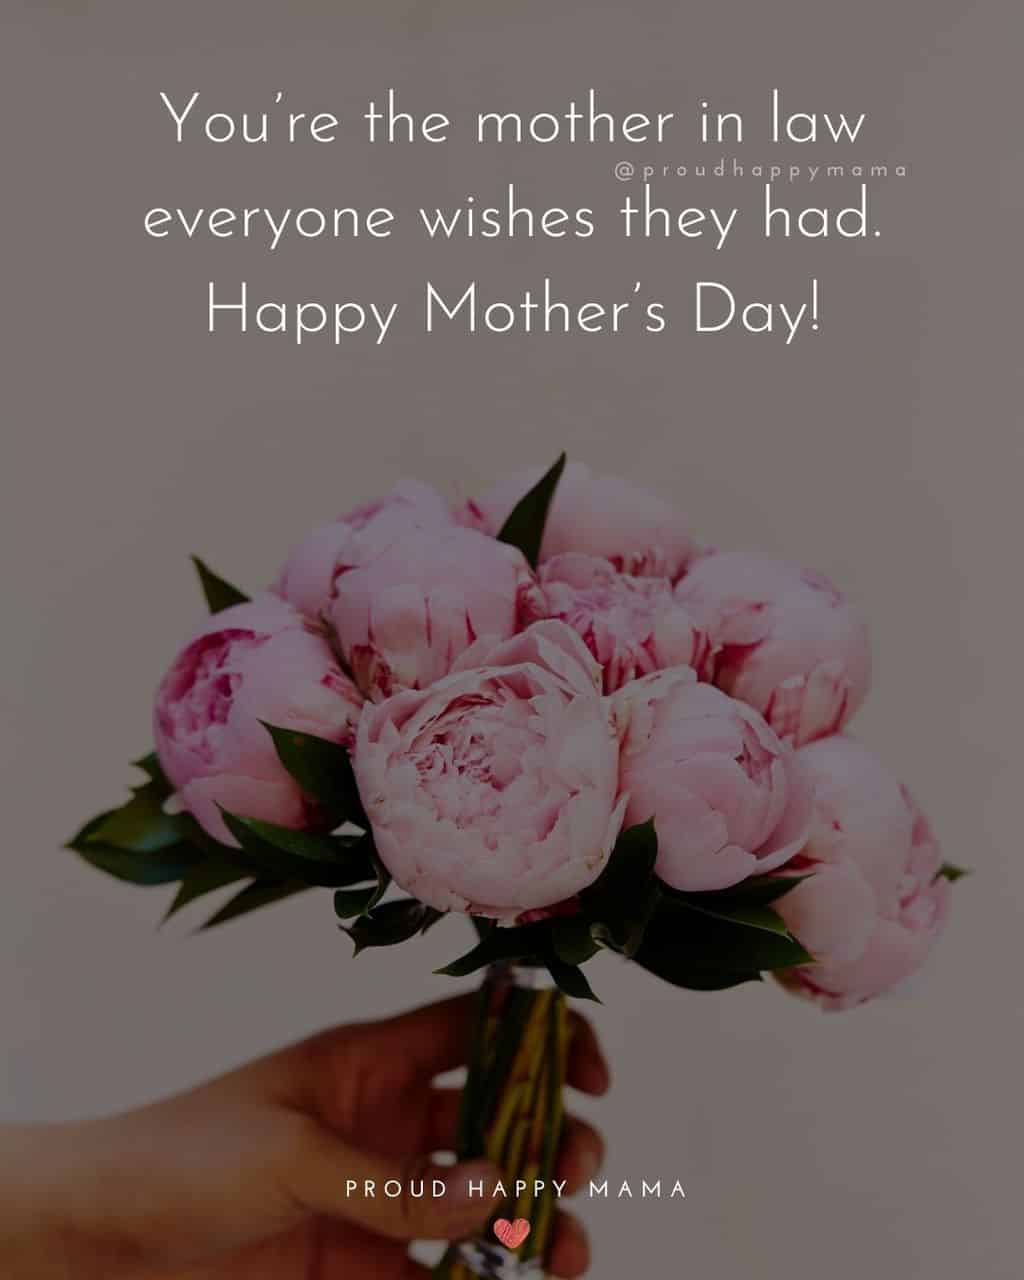 Happy Mothers Day Quotes For Mother In Law - You’re the mother in law everyone wishes they had. Happy Mother’s Day!’Happy Mothers Day Quotes For Mother In Law - You’re the mother in law everyone wishes they had. Happy Mother’s Day!’